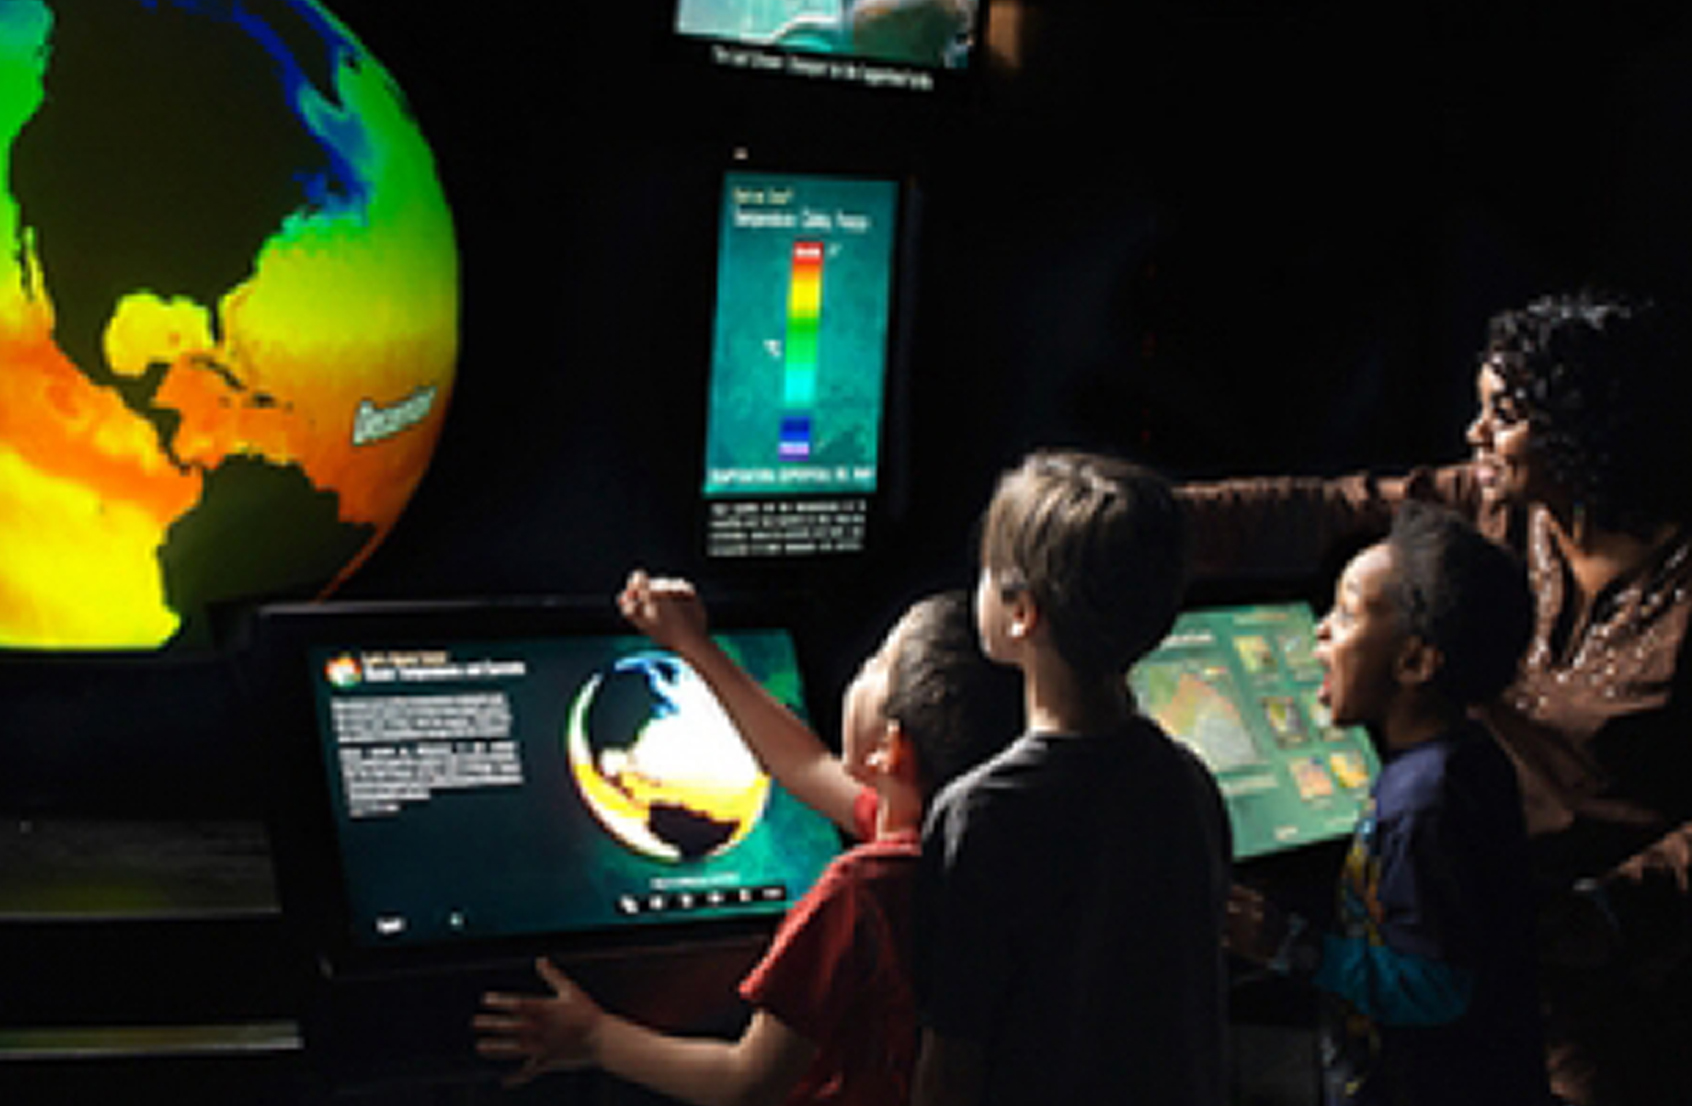 NOAA's Science on a Sphere® (SOS) is a room sized, global display system that uses computers and video projectors to display planetary data onto a six foot diameter sphere, analogous to a giant animated globe.